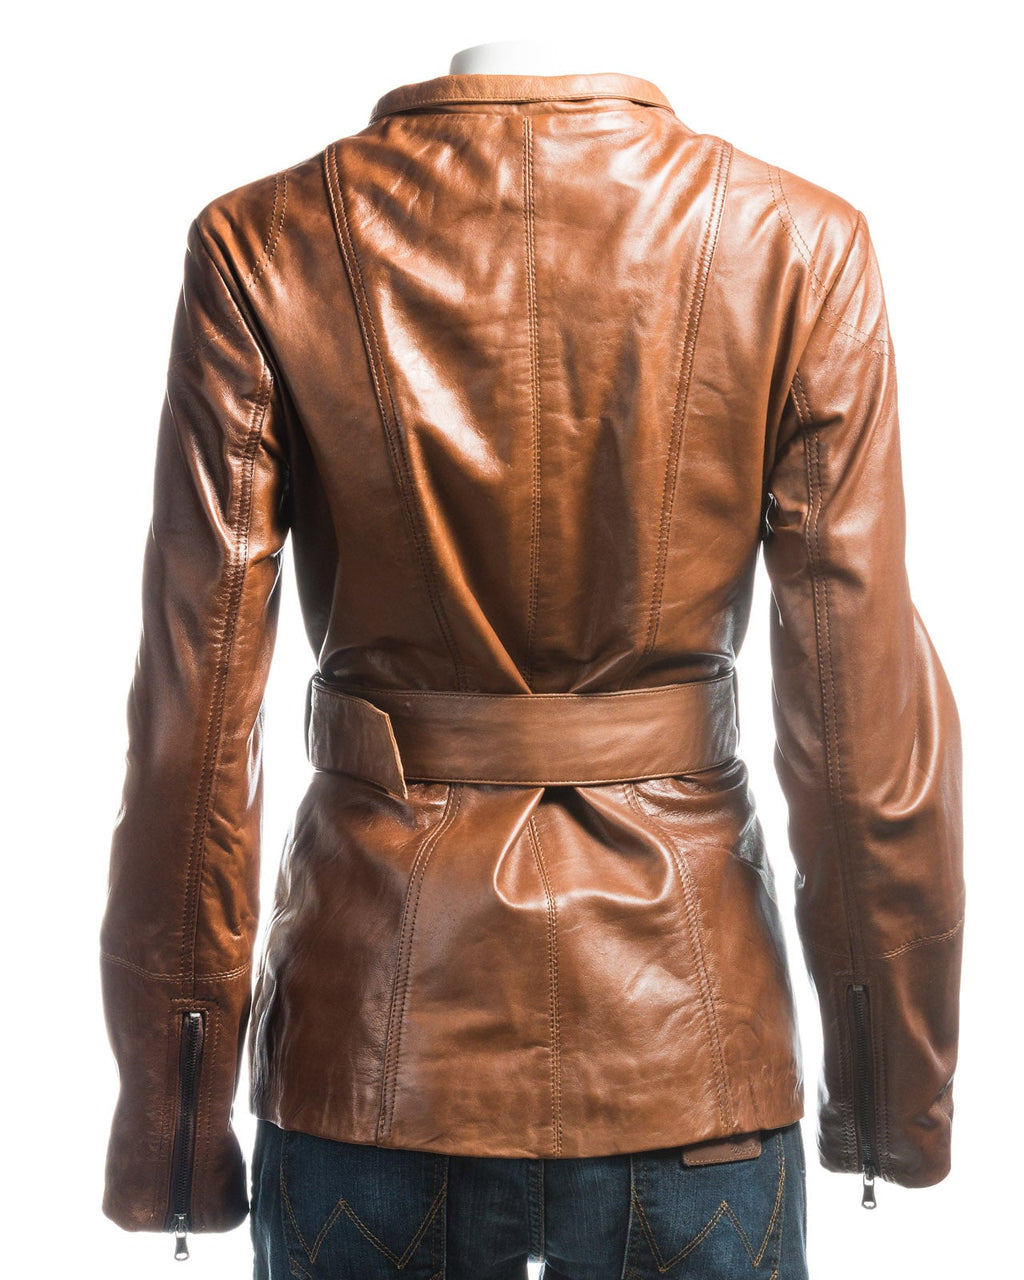 Ladies Cognac Belted Leather Coat With Detachable Fur Trimmed Hood: Paola